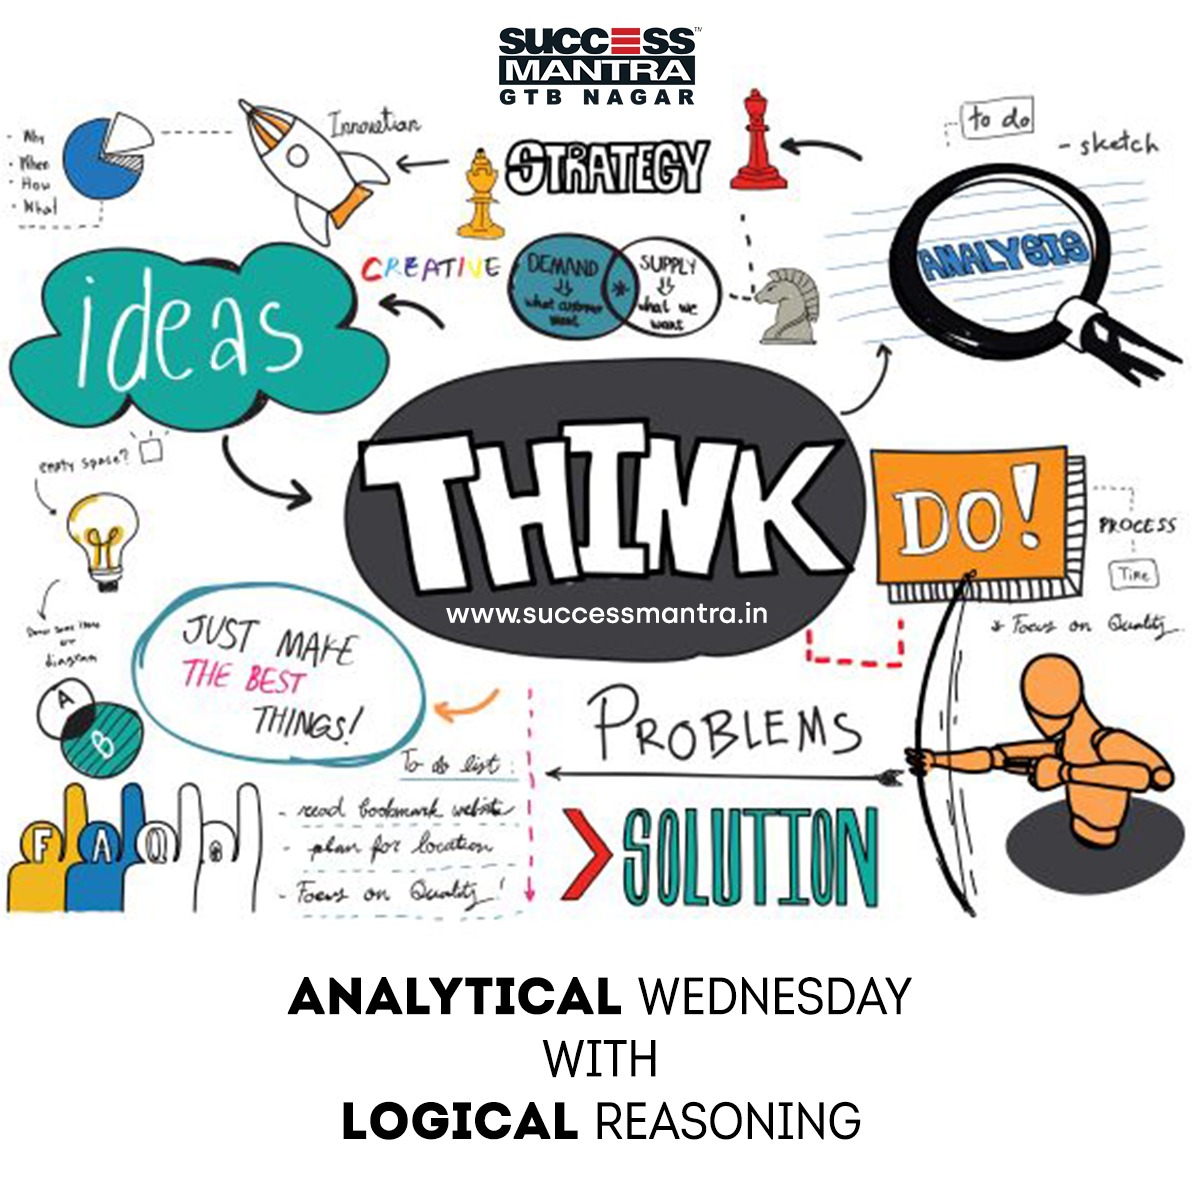 Questions on Logical Reasoning SMLRQ032